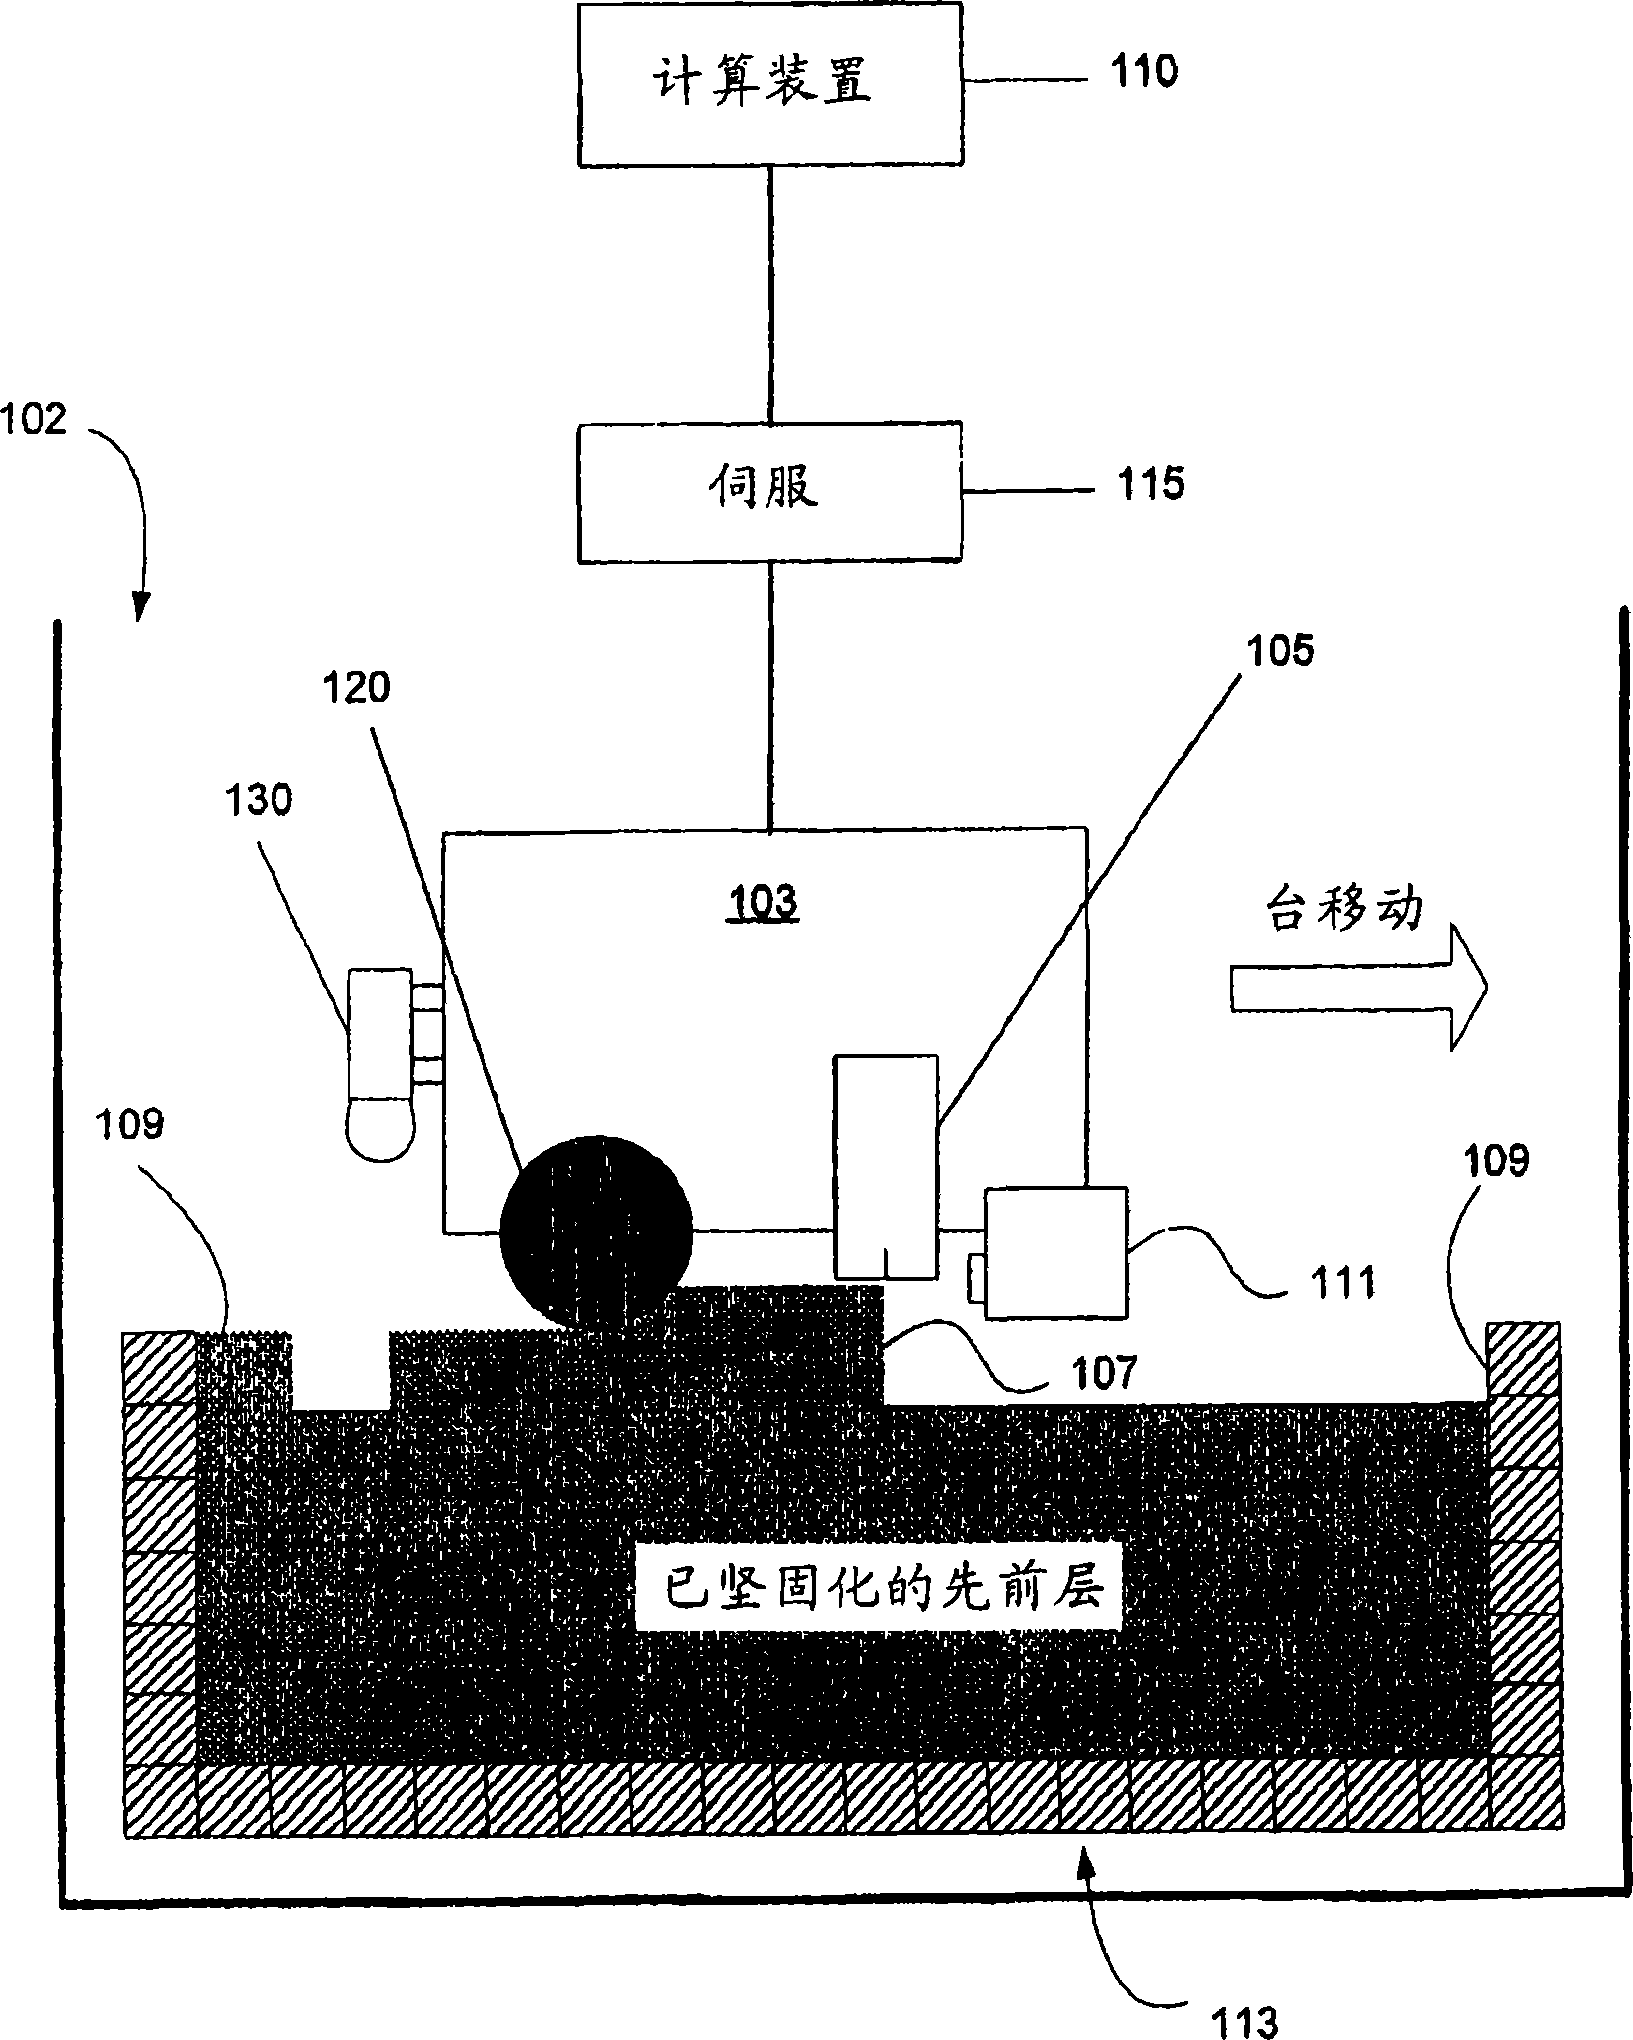 A method and a system for producing an object using solid freeform fabrication